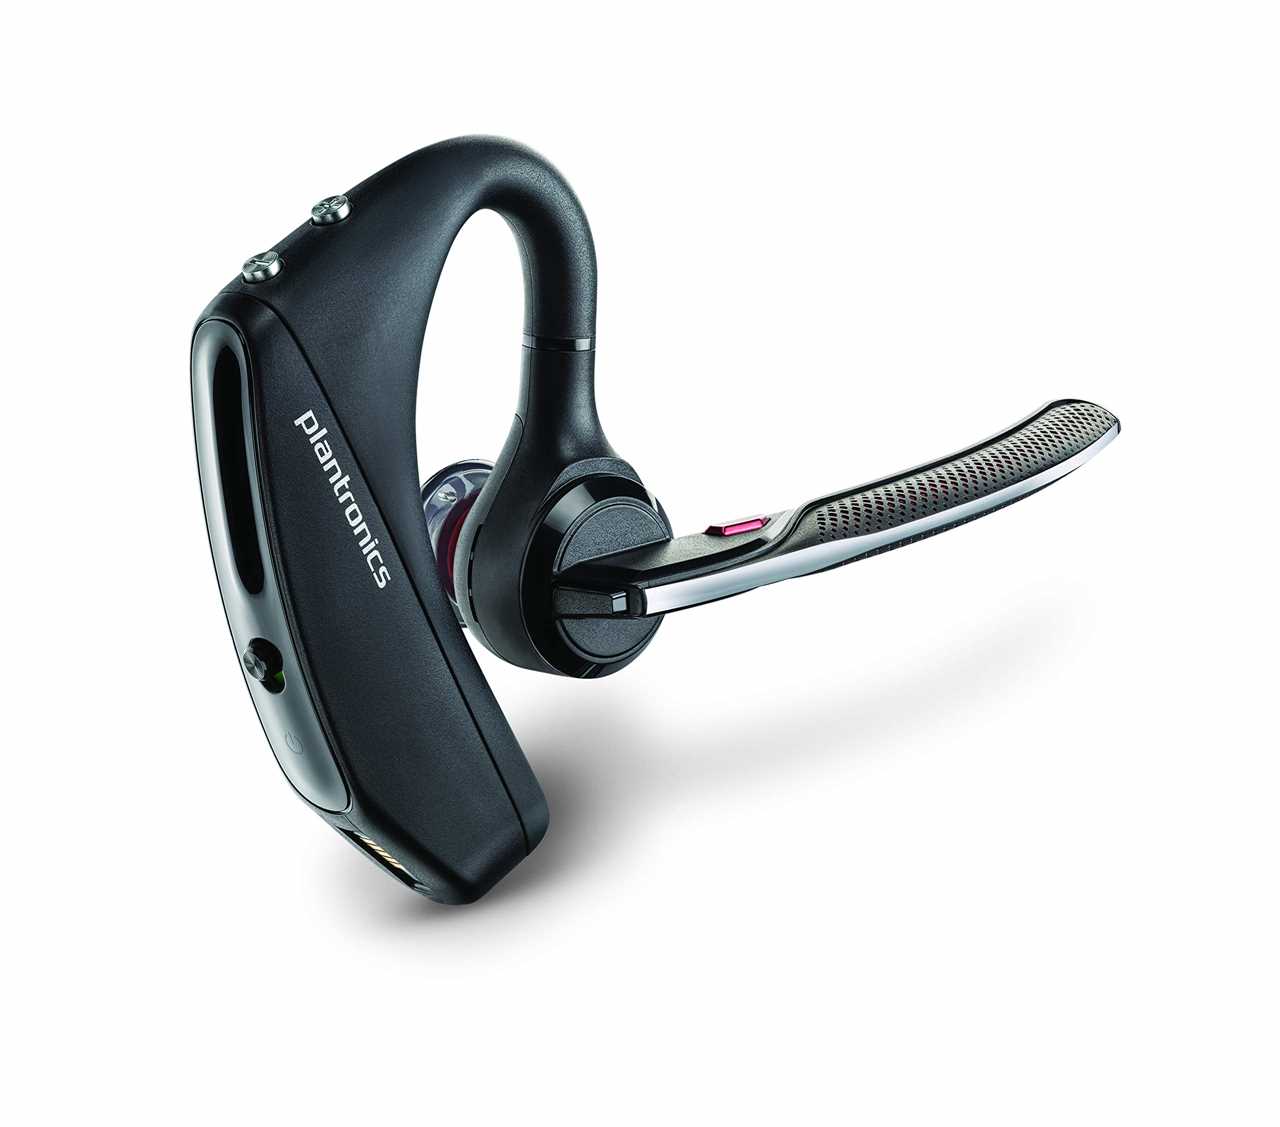 Plantronics Voyager 5200 The Ultimate Bluetooth Headset for Clear and Crisp Communication